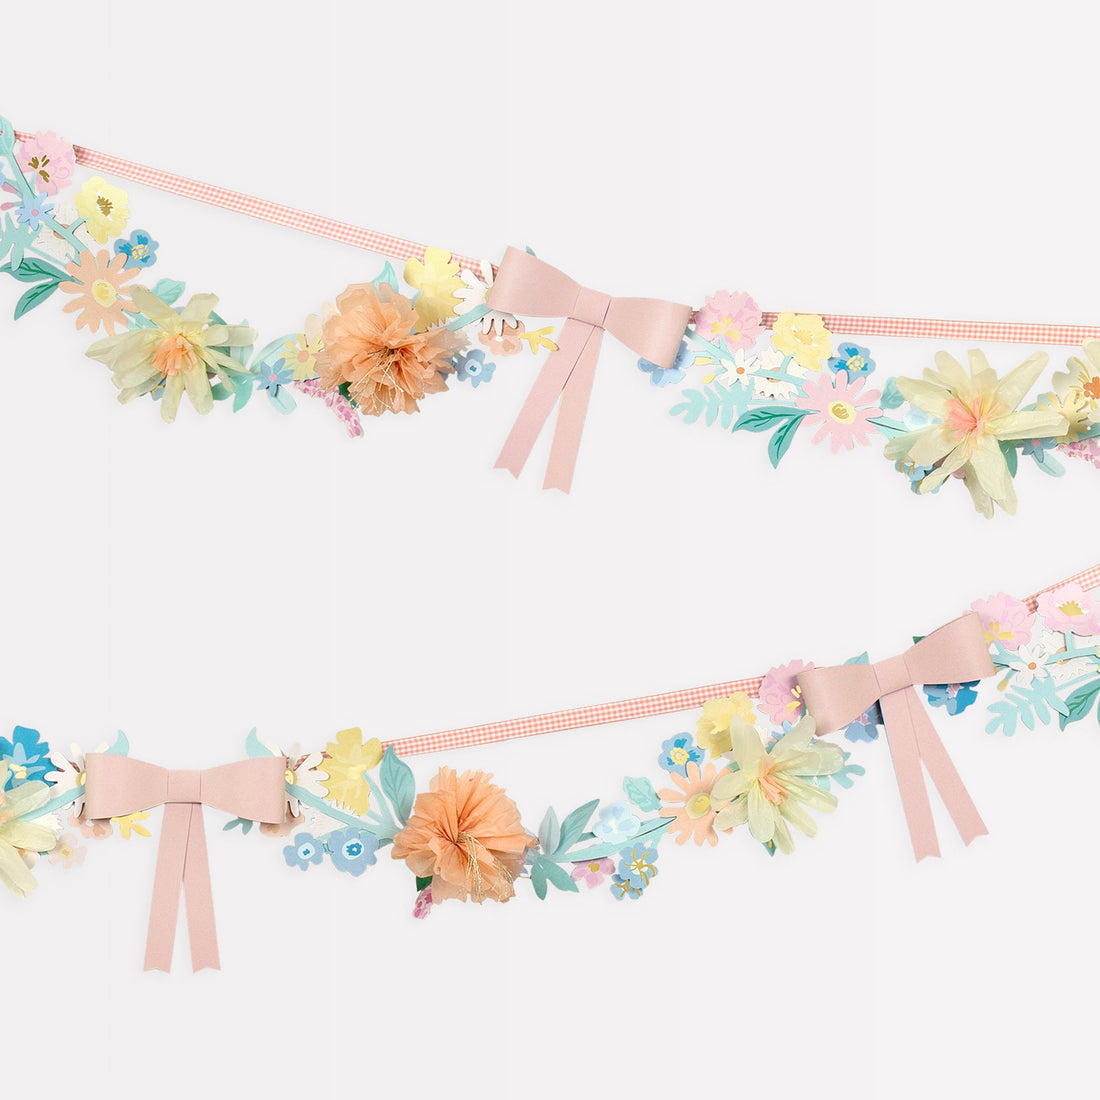 A Meri Meri Flower &amp; Bow Garland adorned with delicate pink flowers and charming bows.